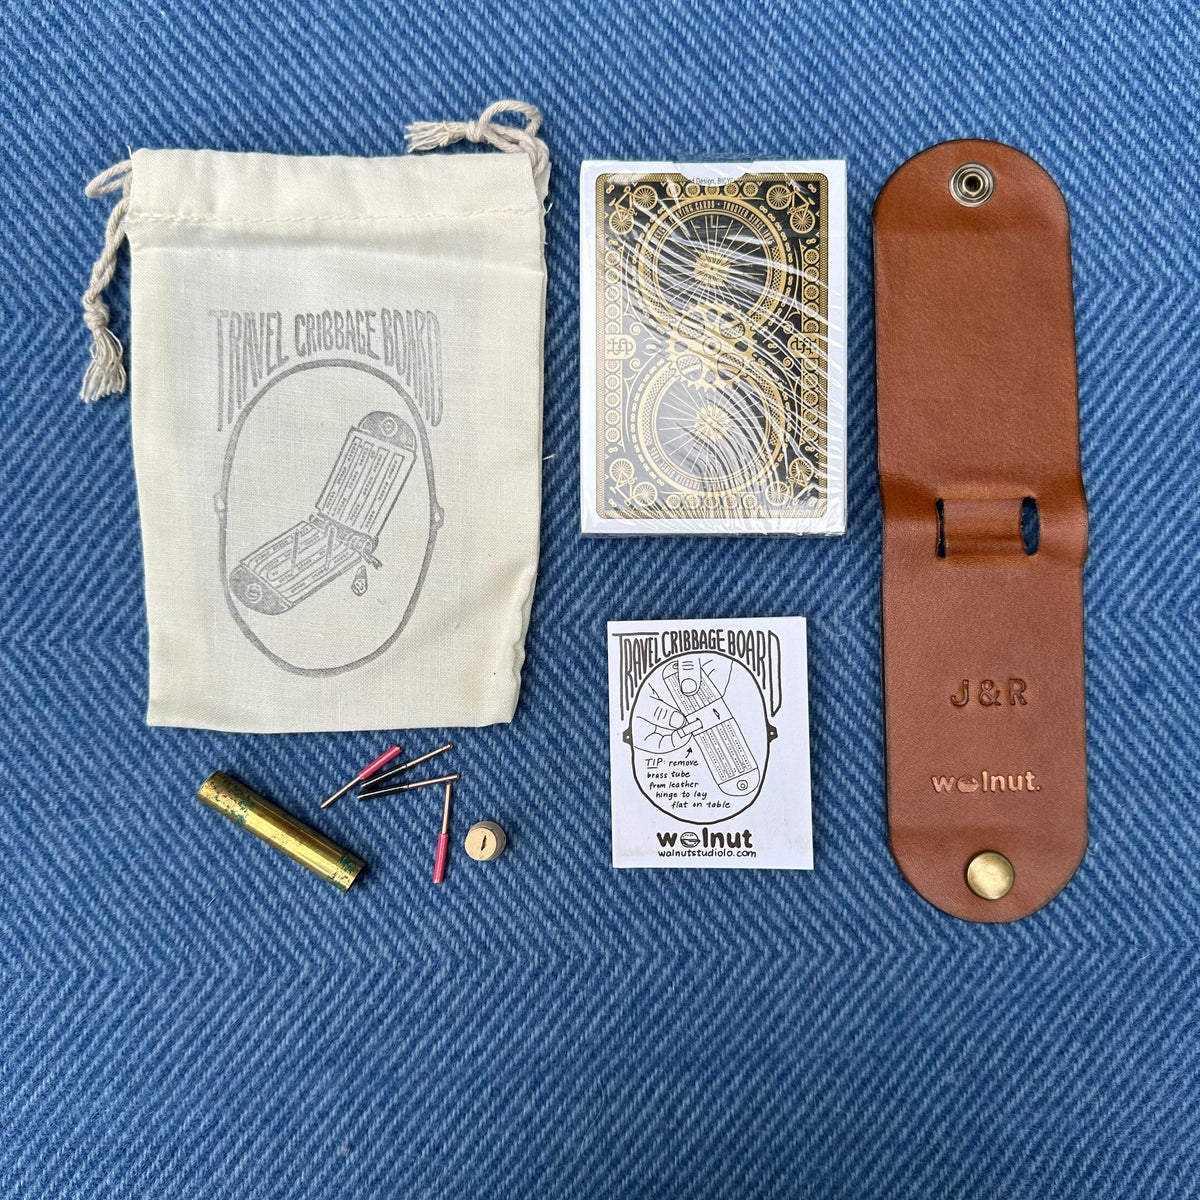 Walnut Studiolo AS-IS AS-IS SALE Original Travel Cribbage Board 2 &quot;J&amp;R&quot; Monogram, Tarnished Wire Peg Tube, Gift Set with Tight Strings and 1885 Cards (#004)